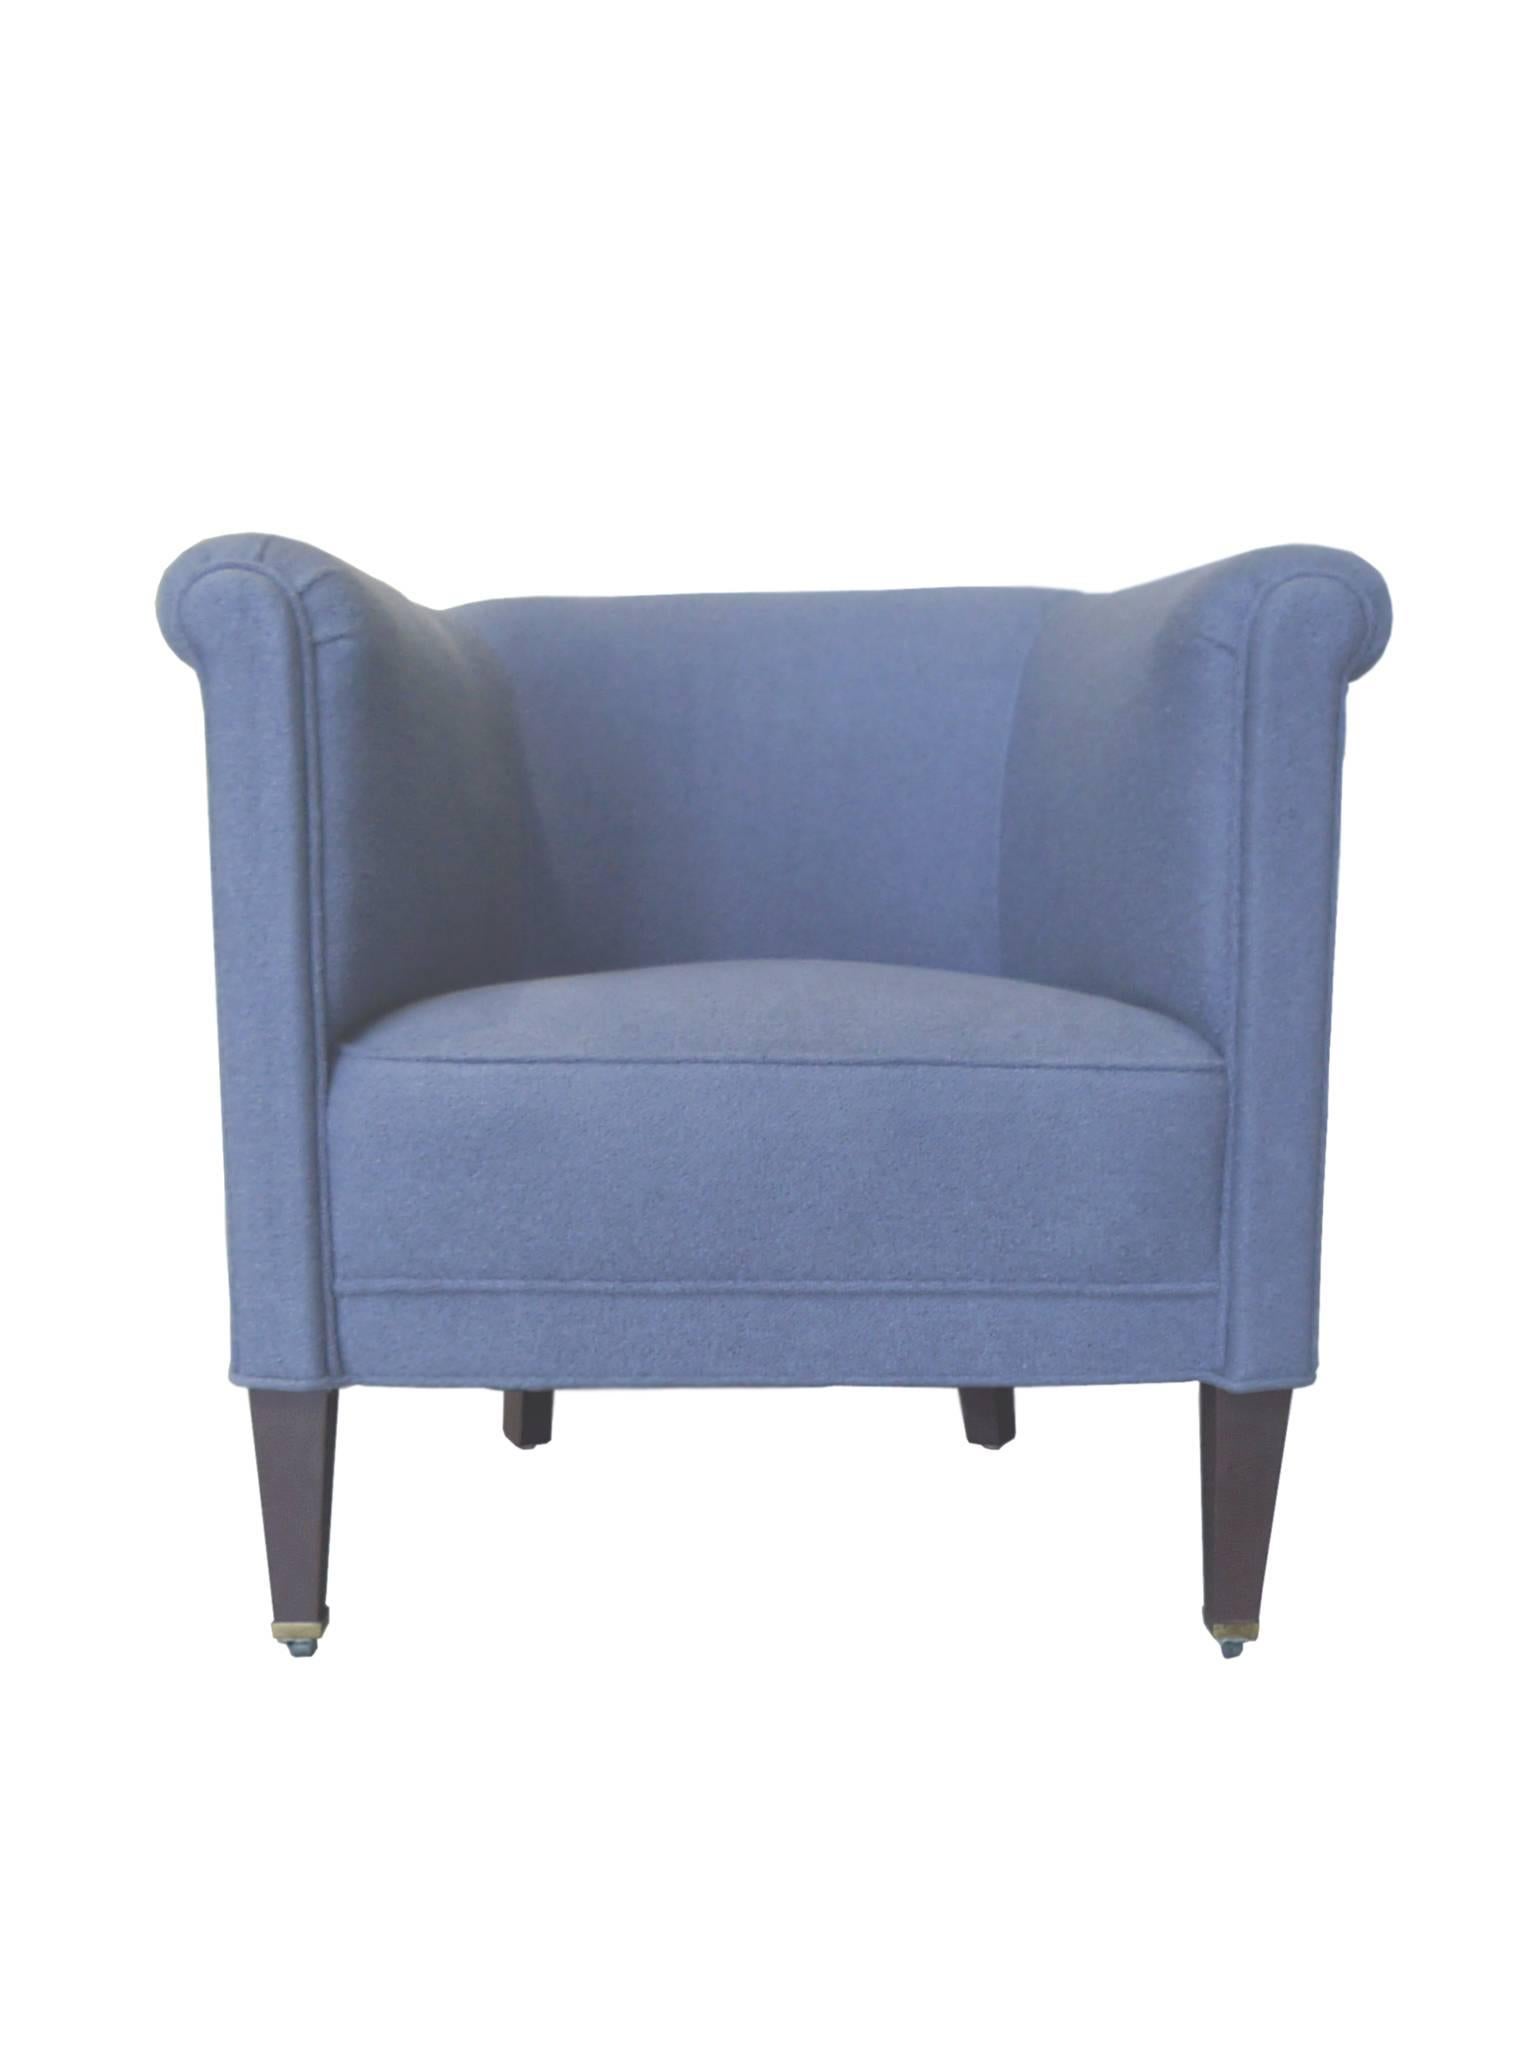 These 1930s Art Deco club chairs are newly reupholstered in a chalk-blue cotton bouclé. They have a beautiful barrel shape that culminates in a scrolling top. The fine reupholstery work includes piping that nicely contours the roundedness of the